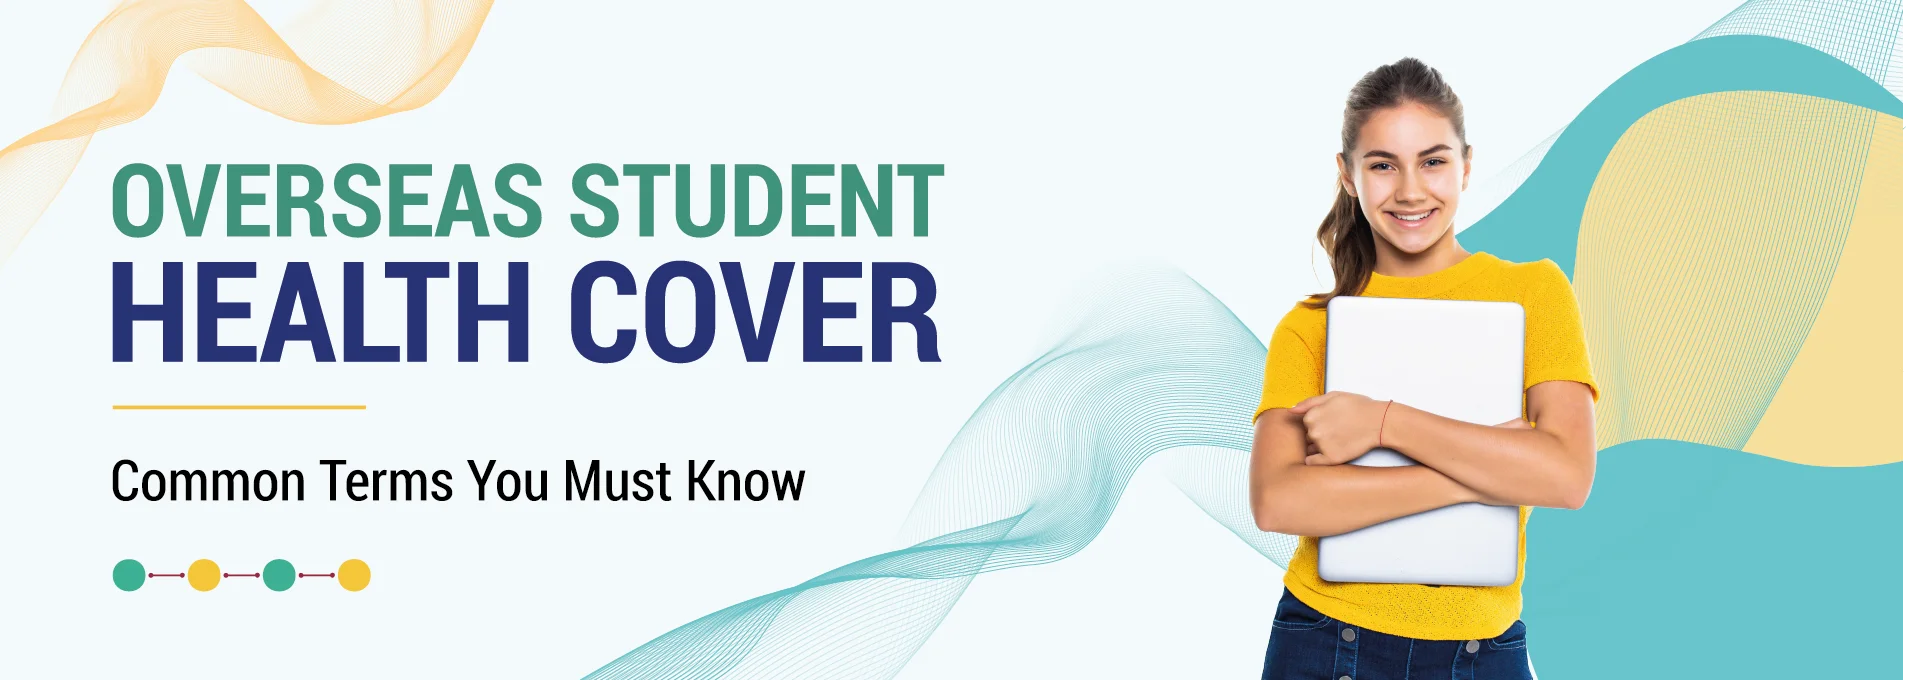 Overseas Student Health Cover: Common Terms You Must Know